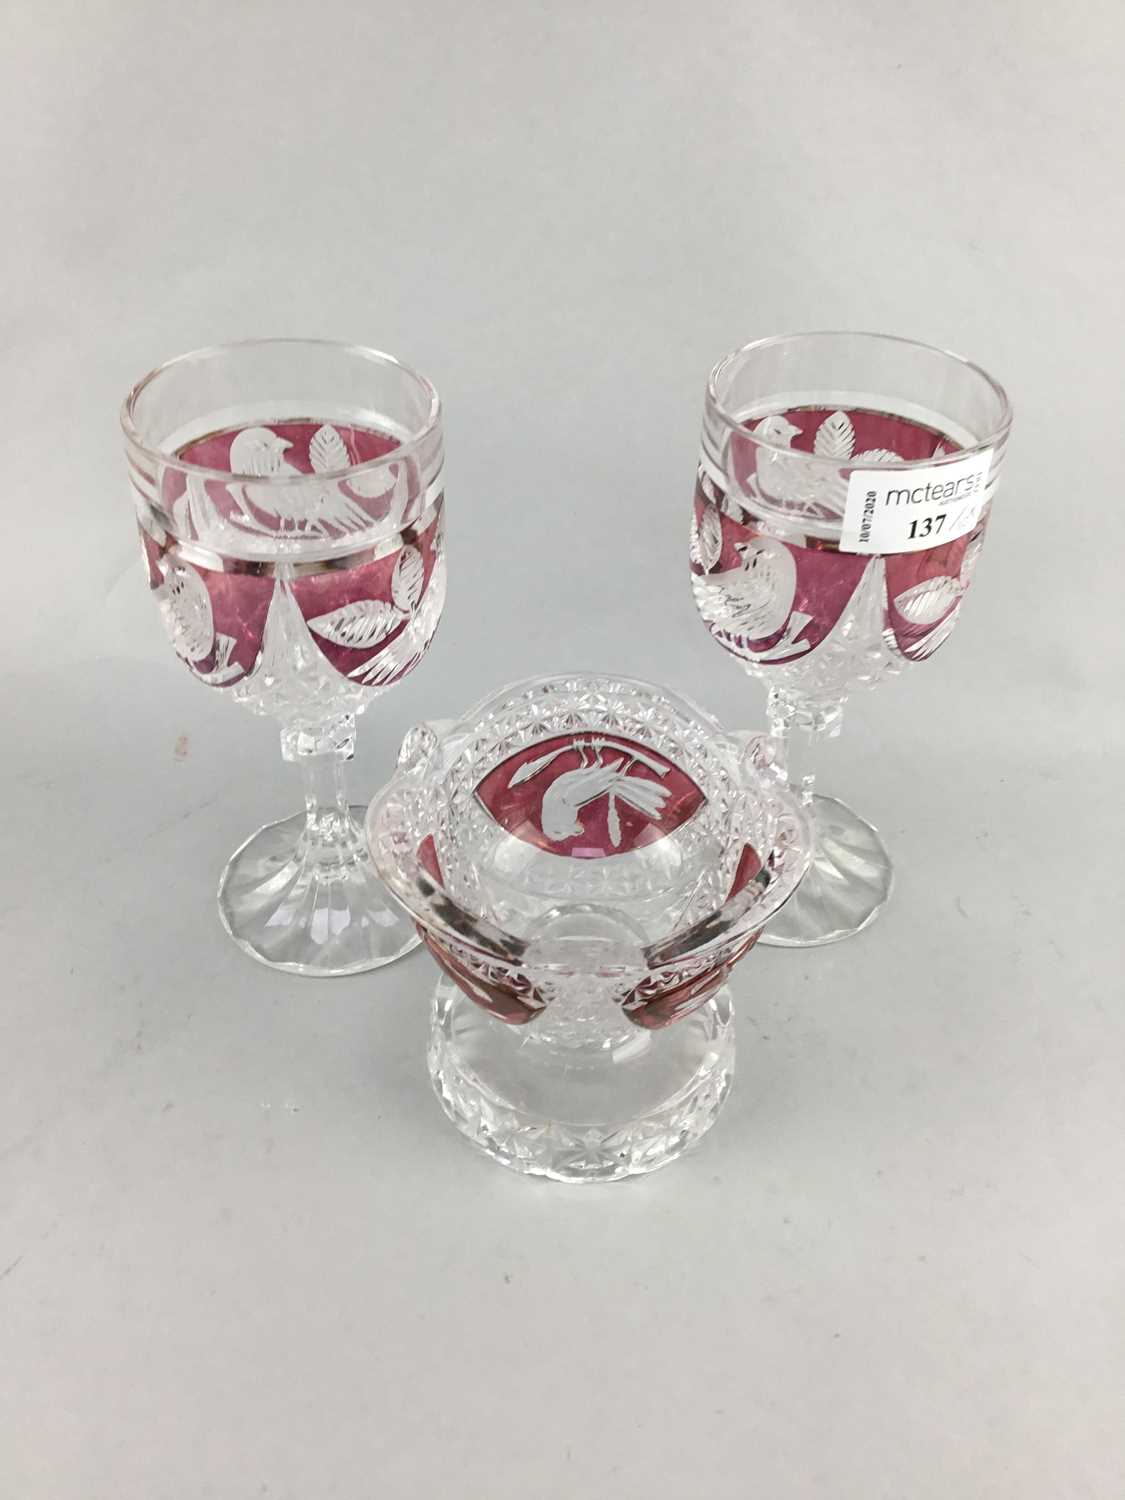 Lot 137 - A PAIR OF GLASS GOBLETS, A MATCHING BOWL AND OTHER ITEMS